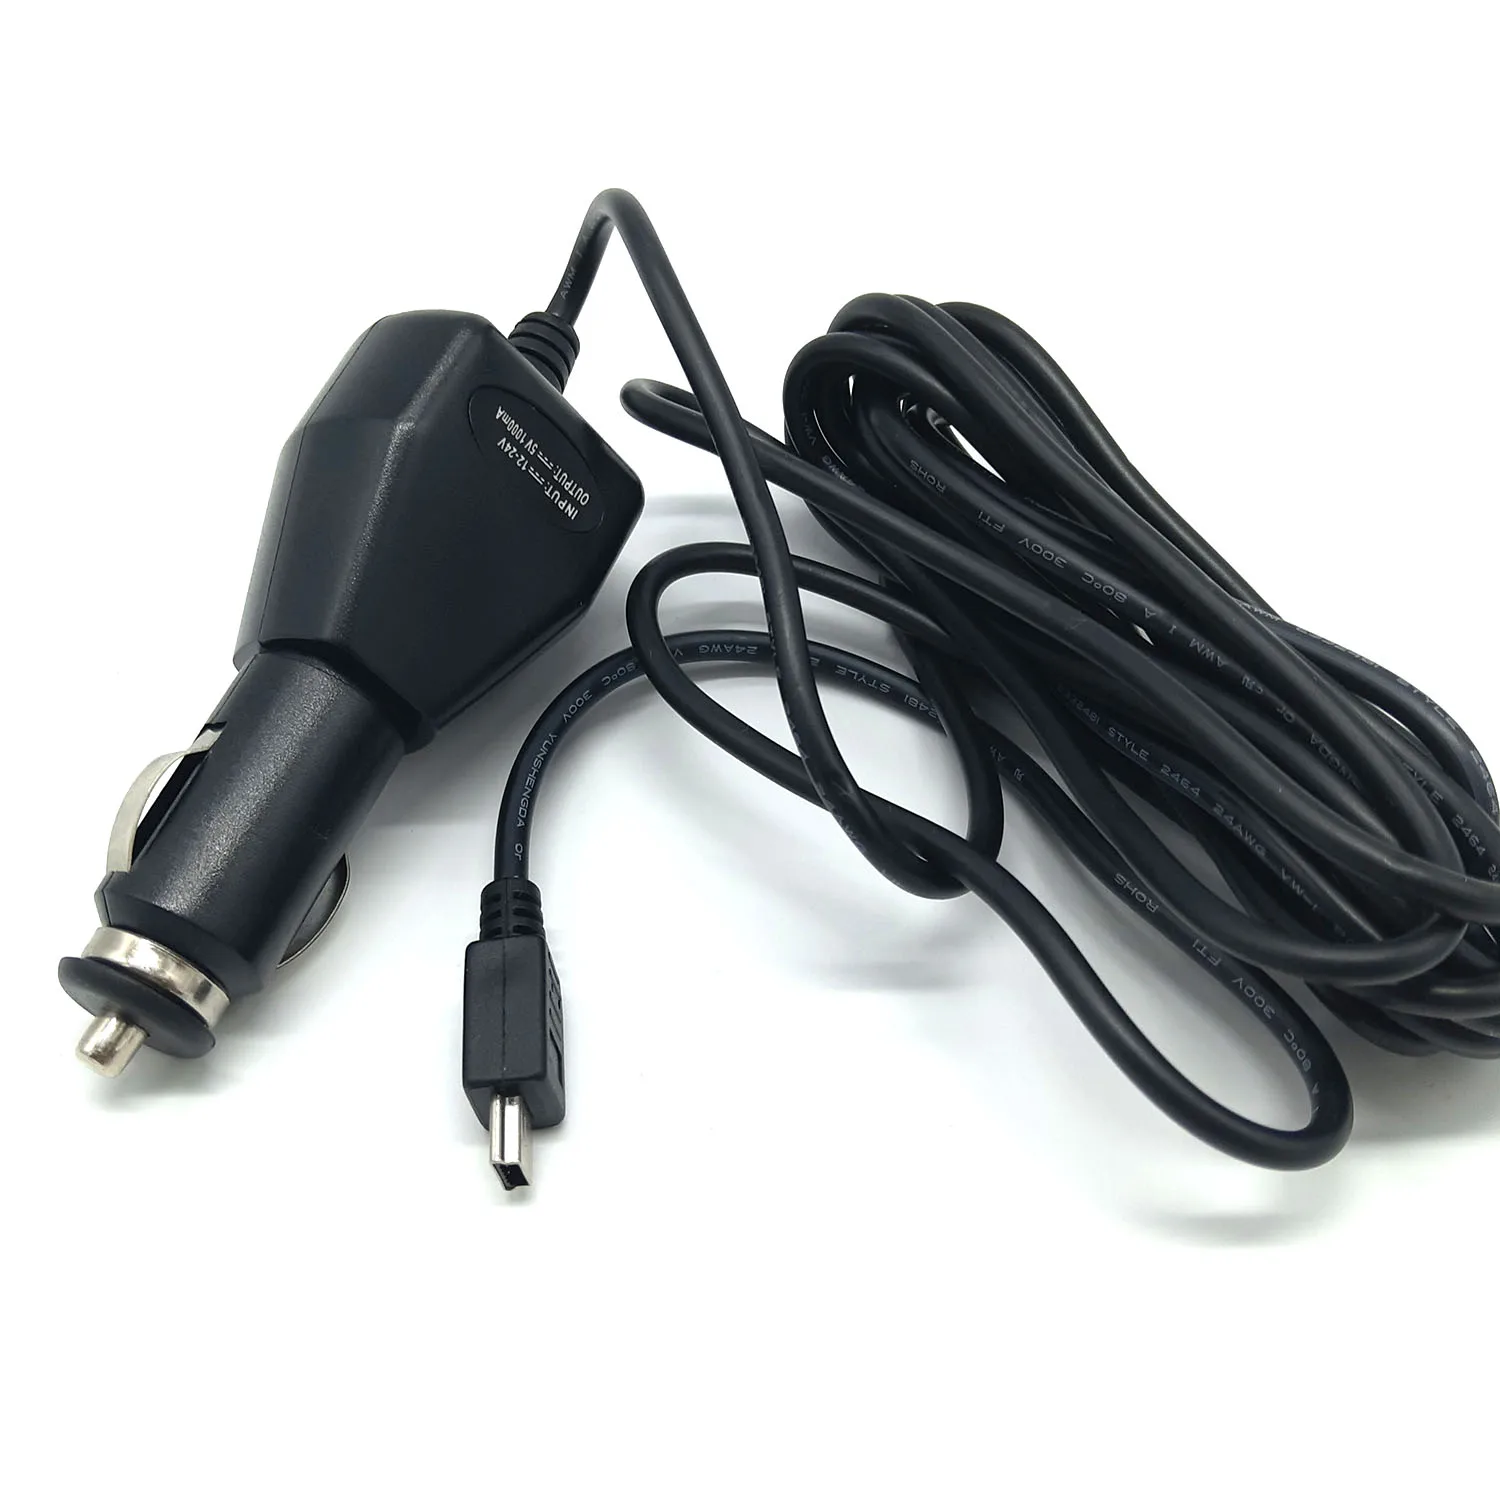 Car Charger power adapter for Garmin Nuvi 52 52LM 54LM 55 55LM 55LMT 56LM 